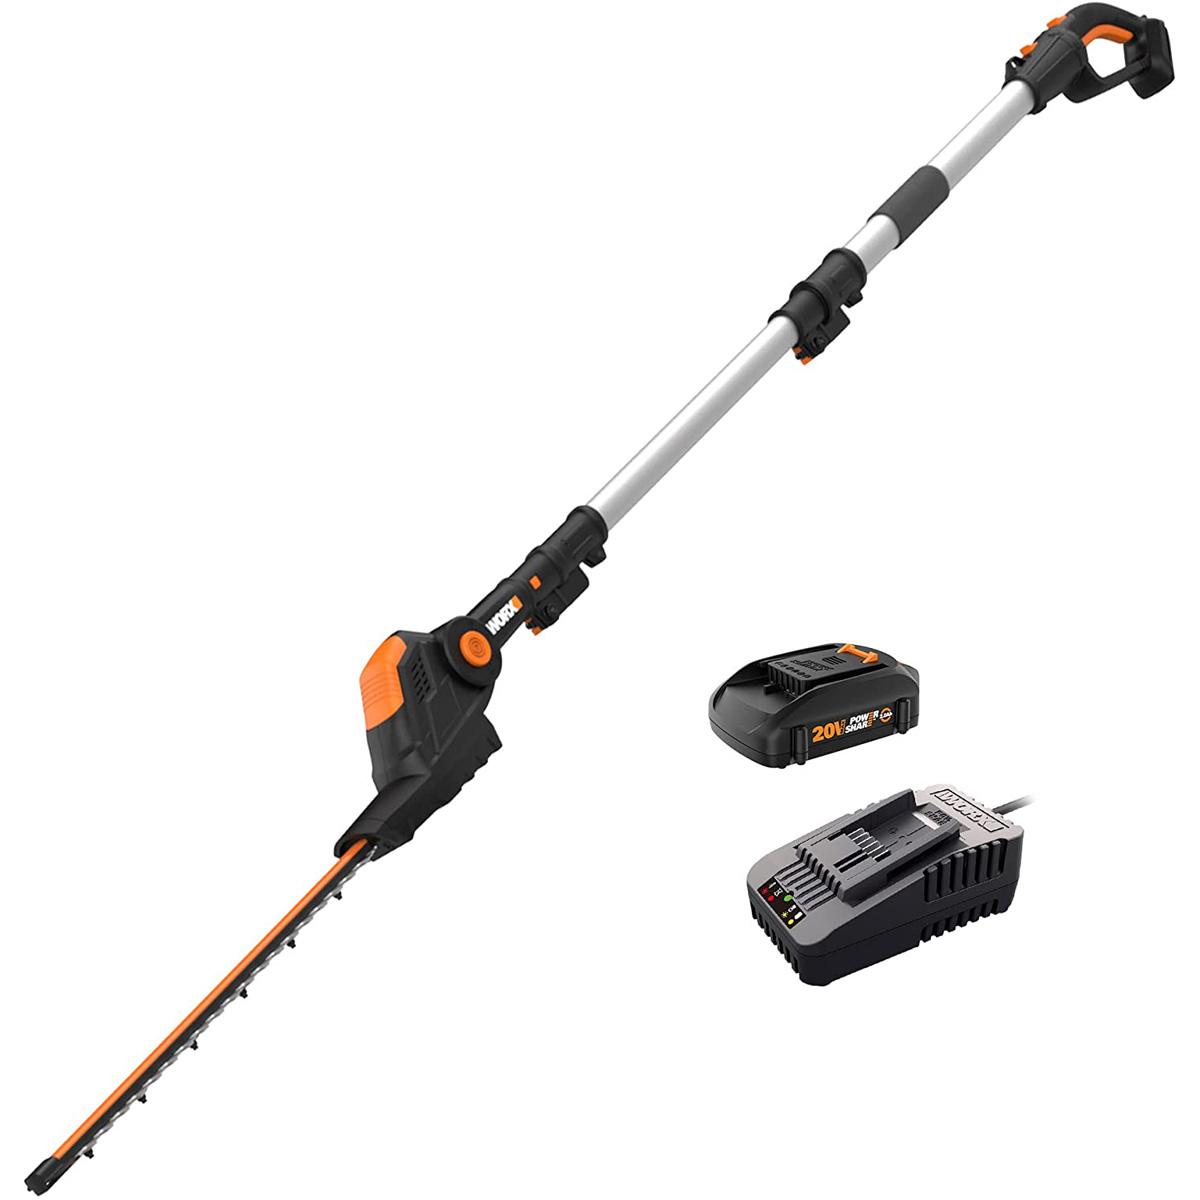 Worx WG252 20V Power Share 2-in-1 20in Cordless Hedge Trimmer for $97.98 Shipped